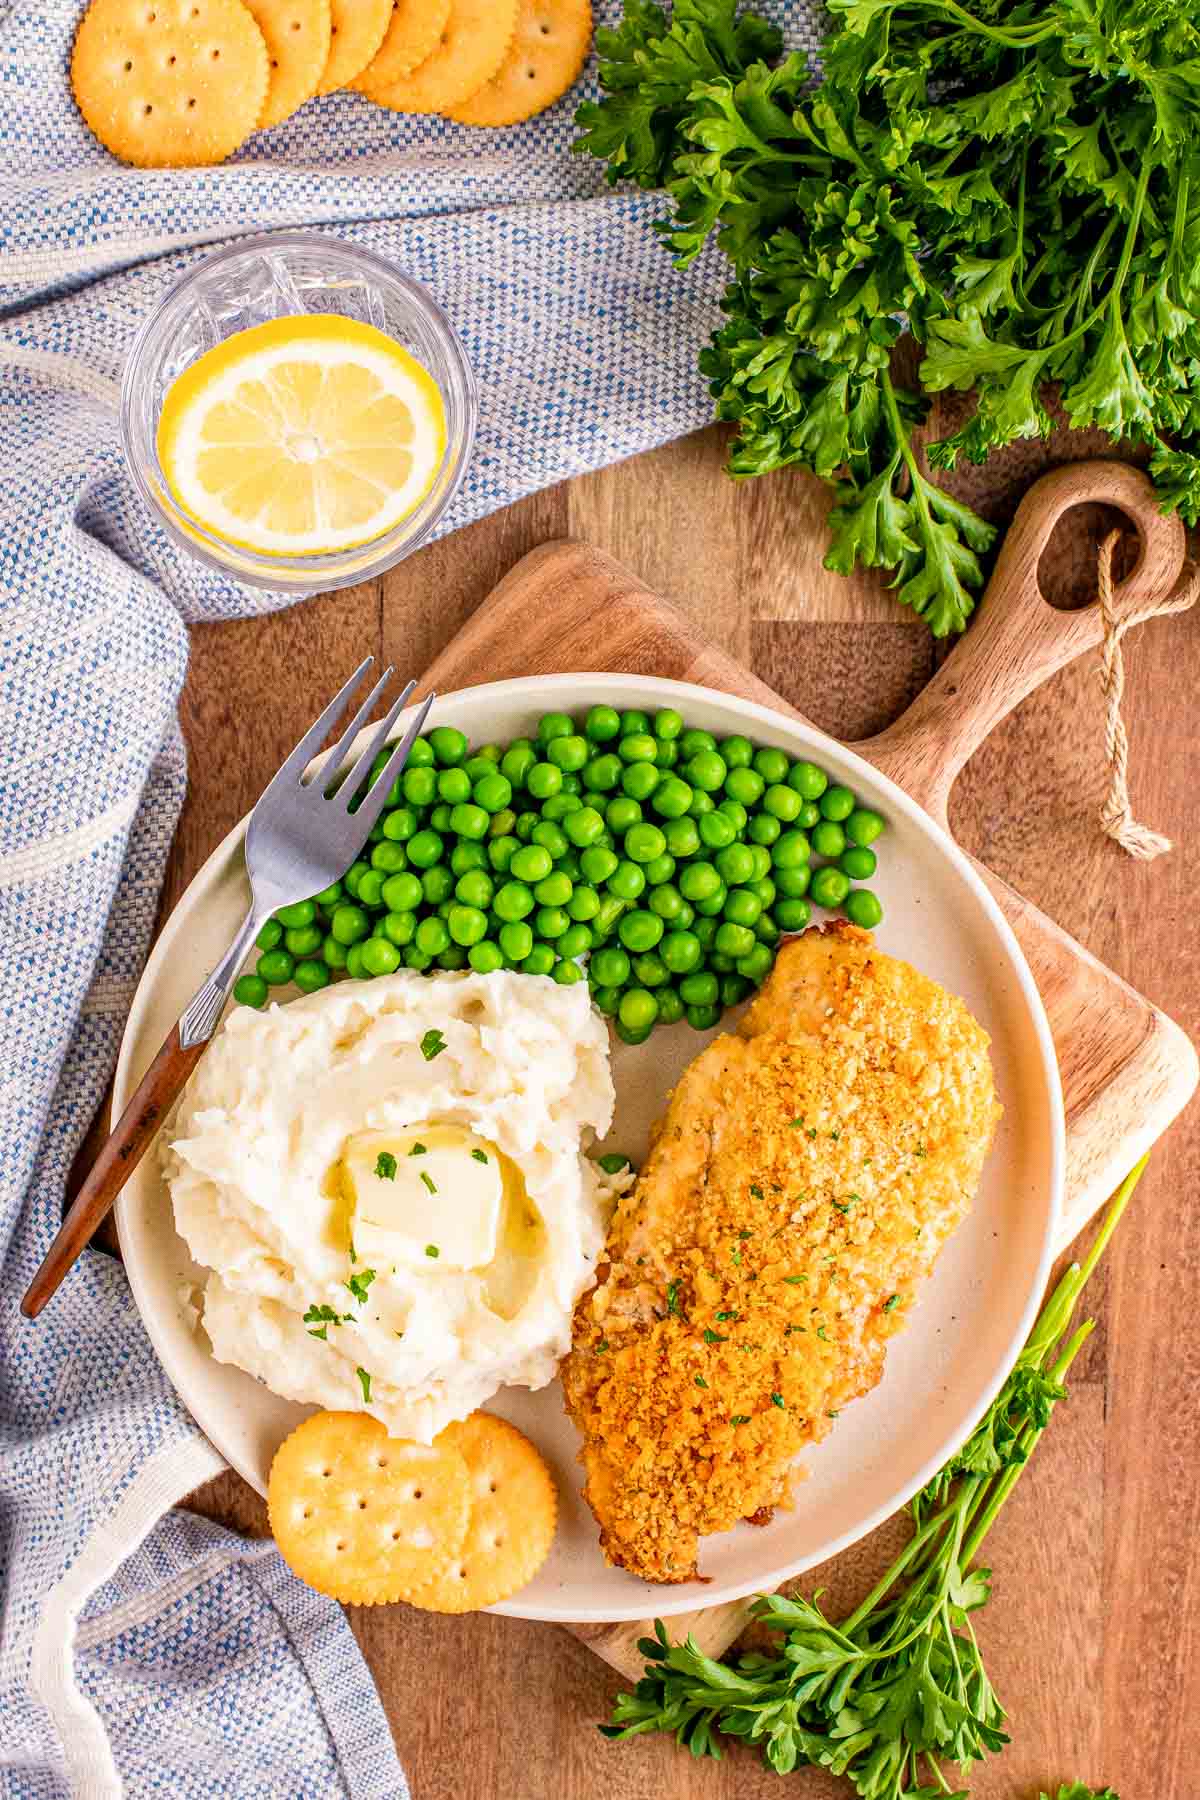 Overhead photo of a dinner plate with mashed potatoes, peas, and ritz cracker chicken breast.